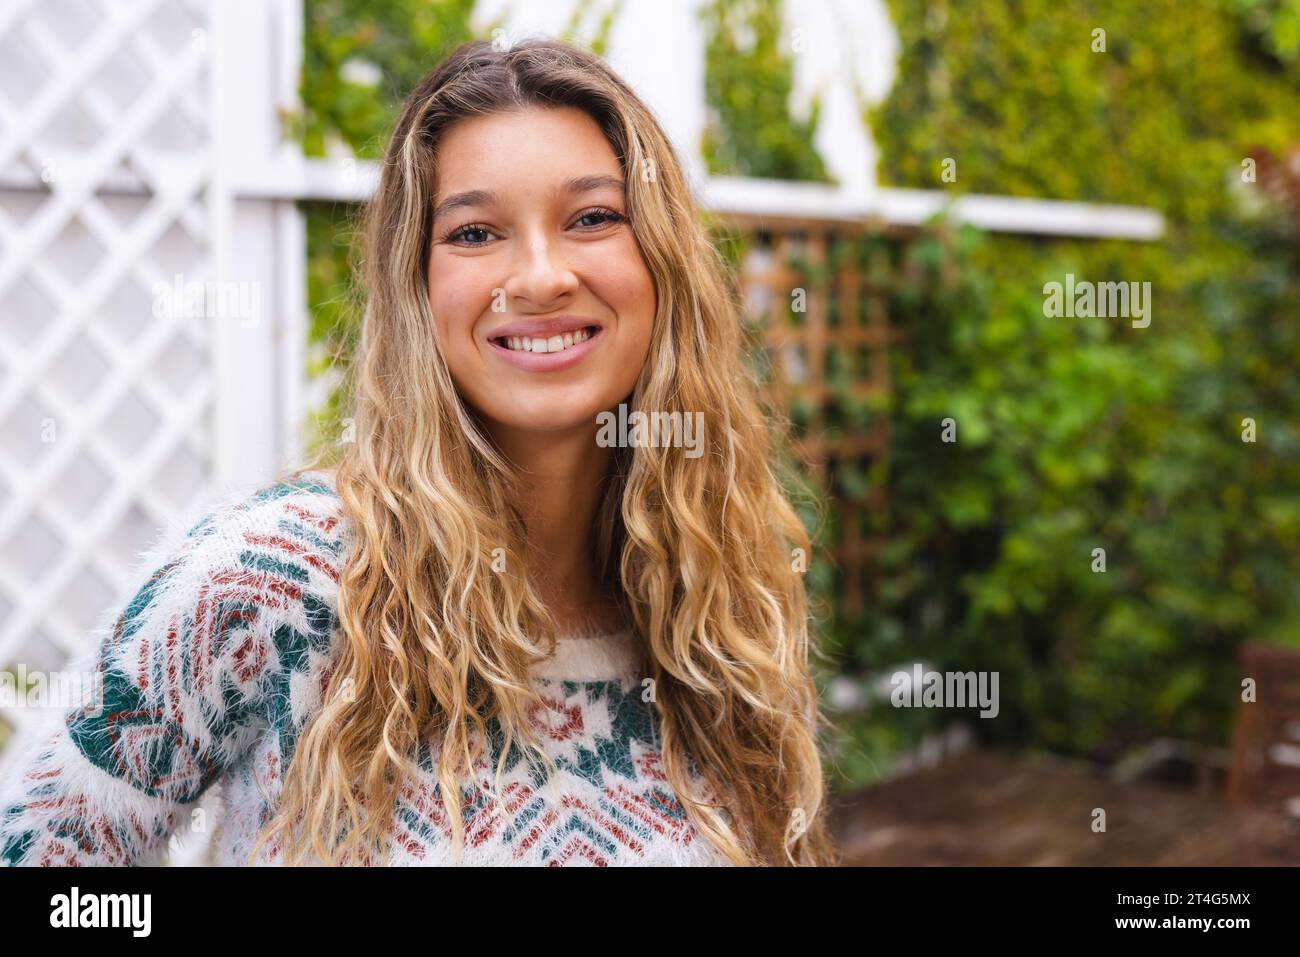 Portrait of happy caucasian woman with long blonde hair smiling in garden, copy space Stock Photo